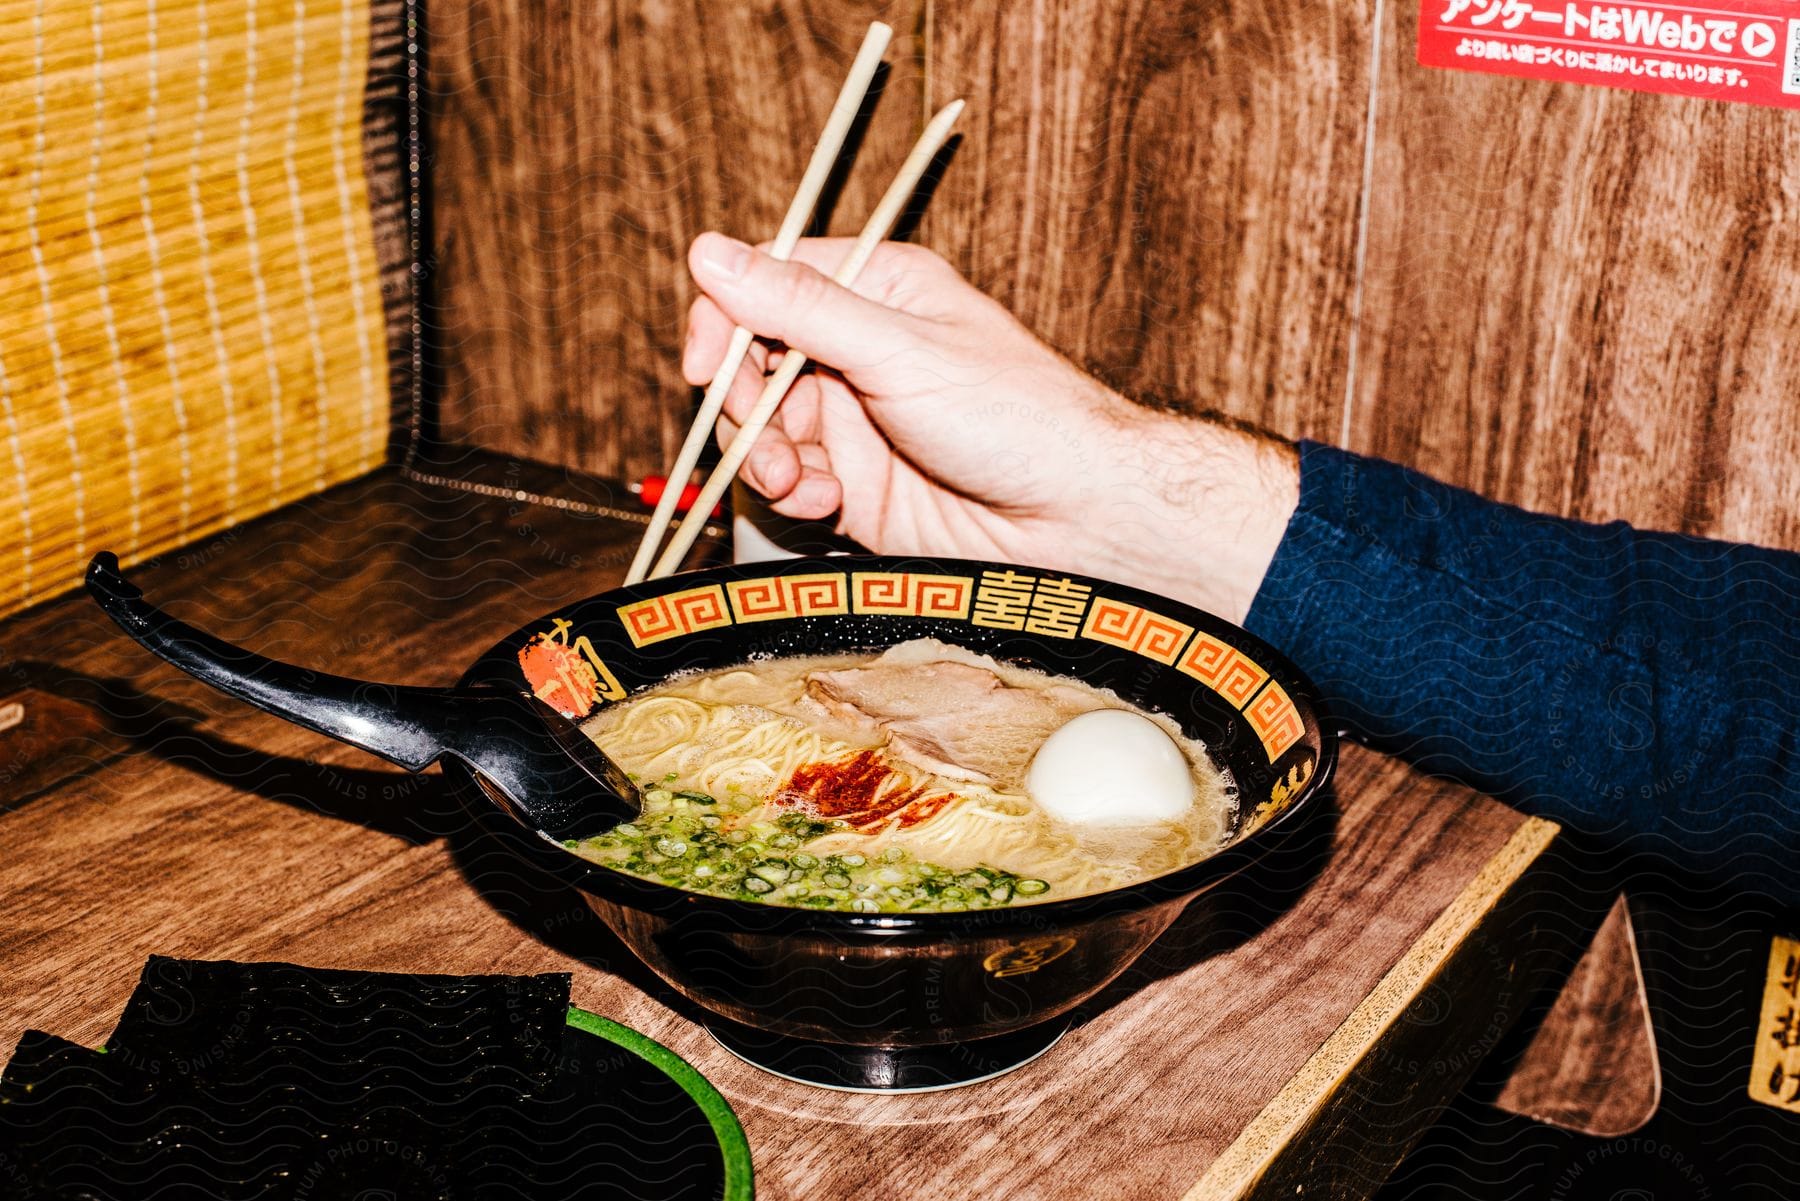 A person's right hand is holding chopsticks as they eat from a large bowl